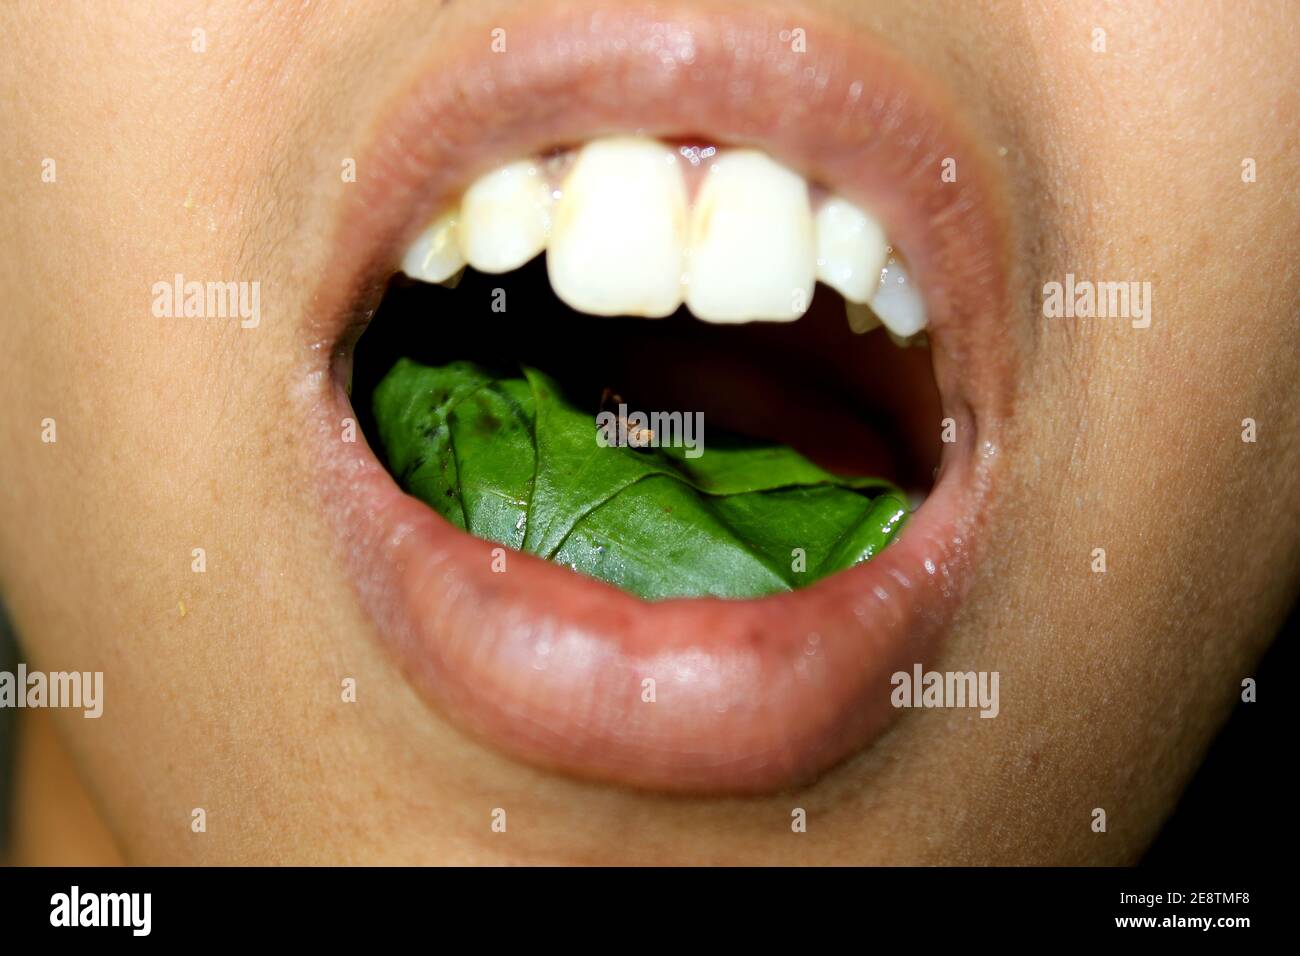 Betal nut Chewing, Paan, India Herbal Mouth freshener after eating food Stock Photo